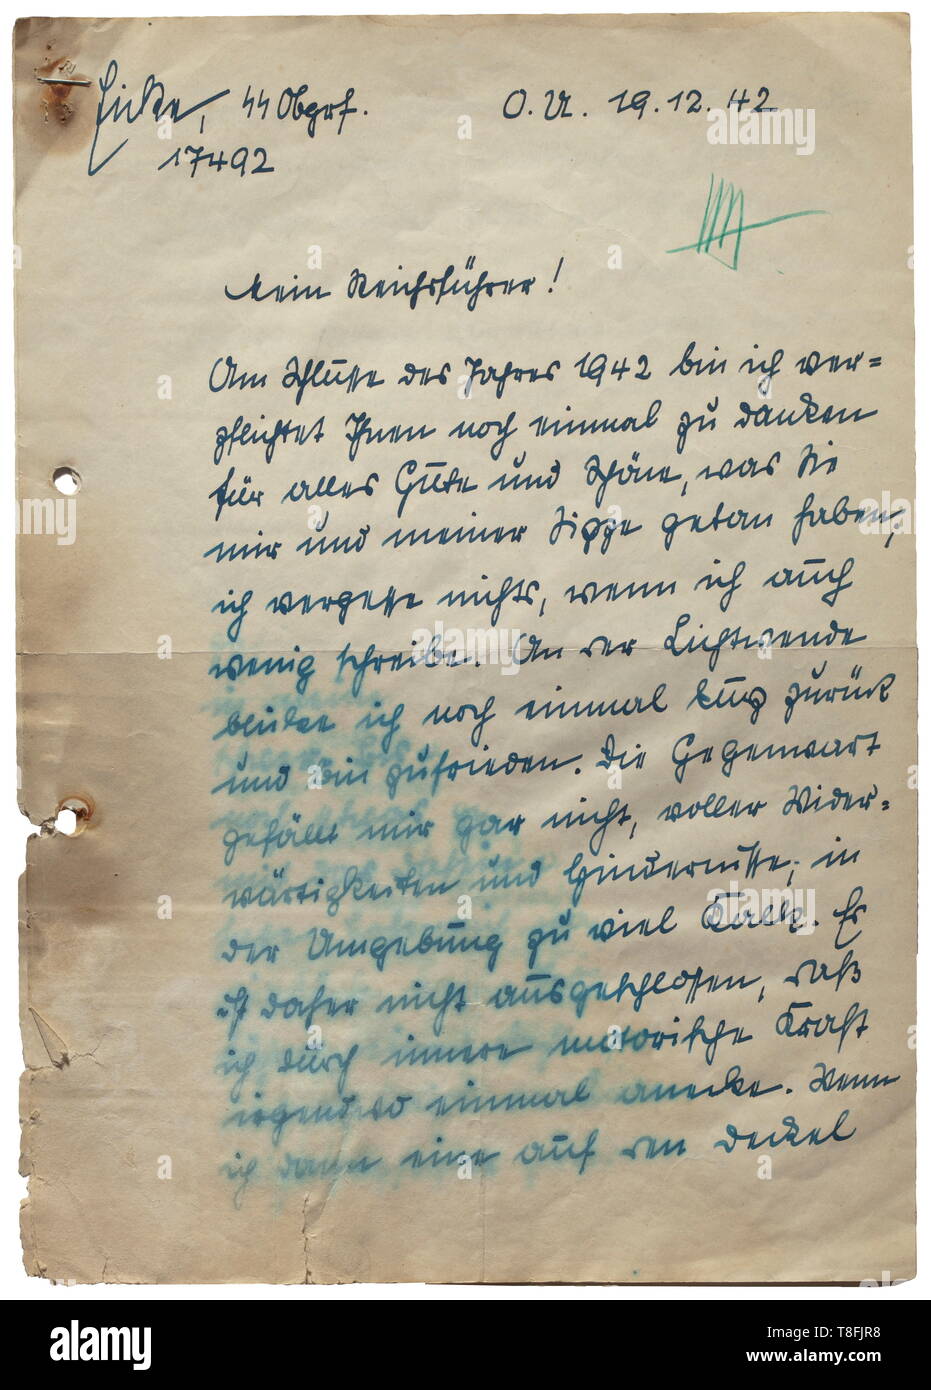 Theodor Eicke - a four-page handwritten letter to Himmler Countersigned with Himmler's initials 'HH', (tr) 'My Reichsführer! At the end of the year 1942 I am obliged to thank you once again for everything good and beautiful that you have done for me and my family...the present does not please me at all, full of repulsiveness and obstacles...inwardly stronger and ready for action...becoming rabid, when one sees the exhaustion in uniforms milling around here in this obnoxious place behind the frontline...for the new year of 1943 I wish you and the SSt.Div. all the best from m, Editorial-Use-Only Stock Photo